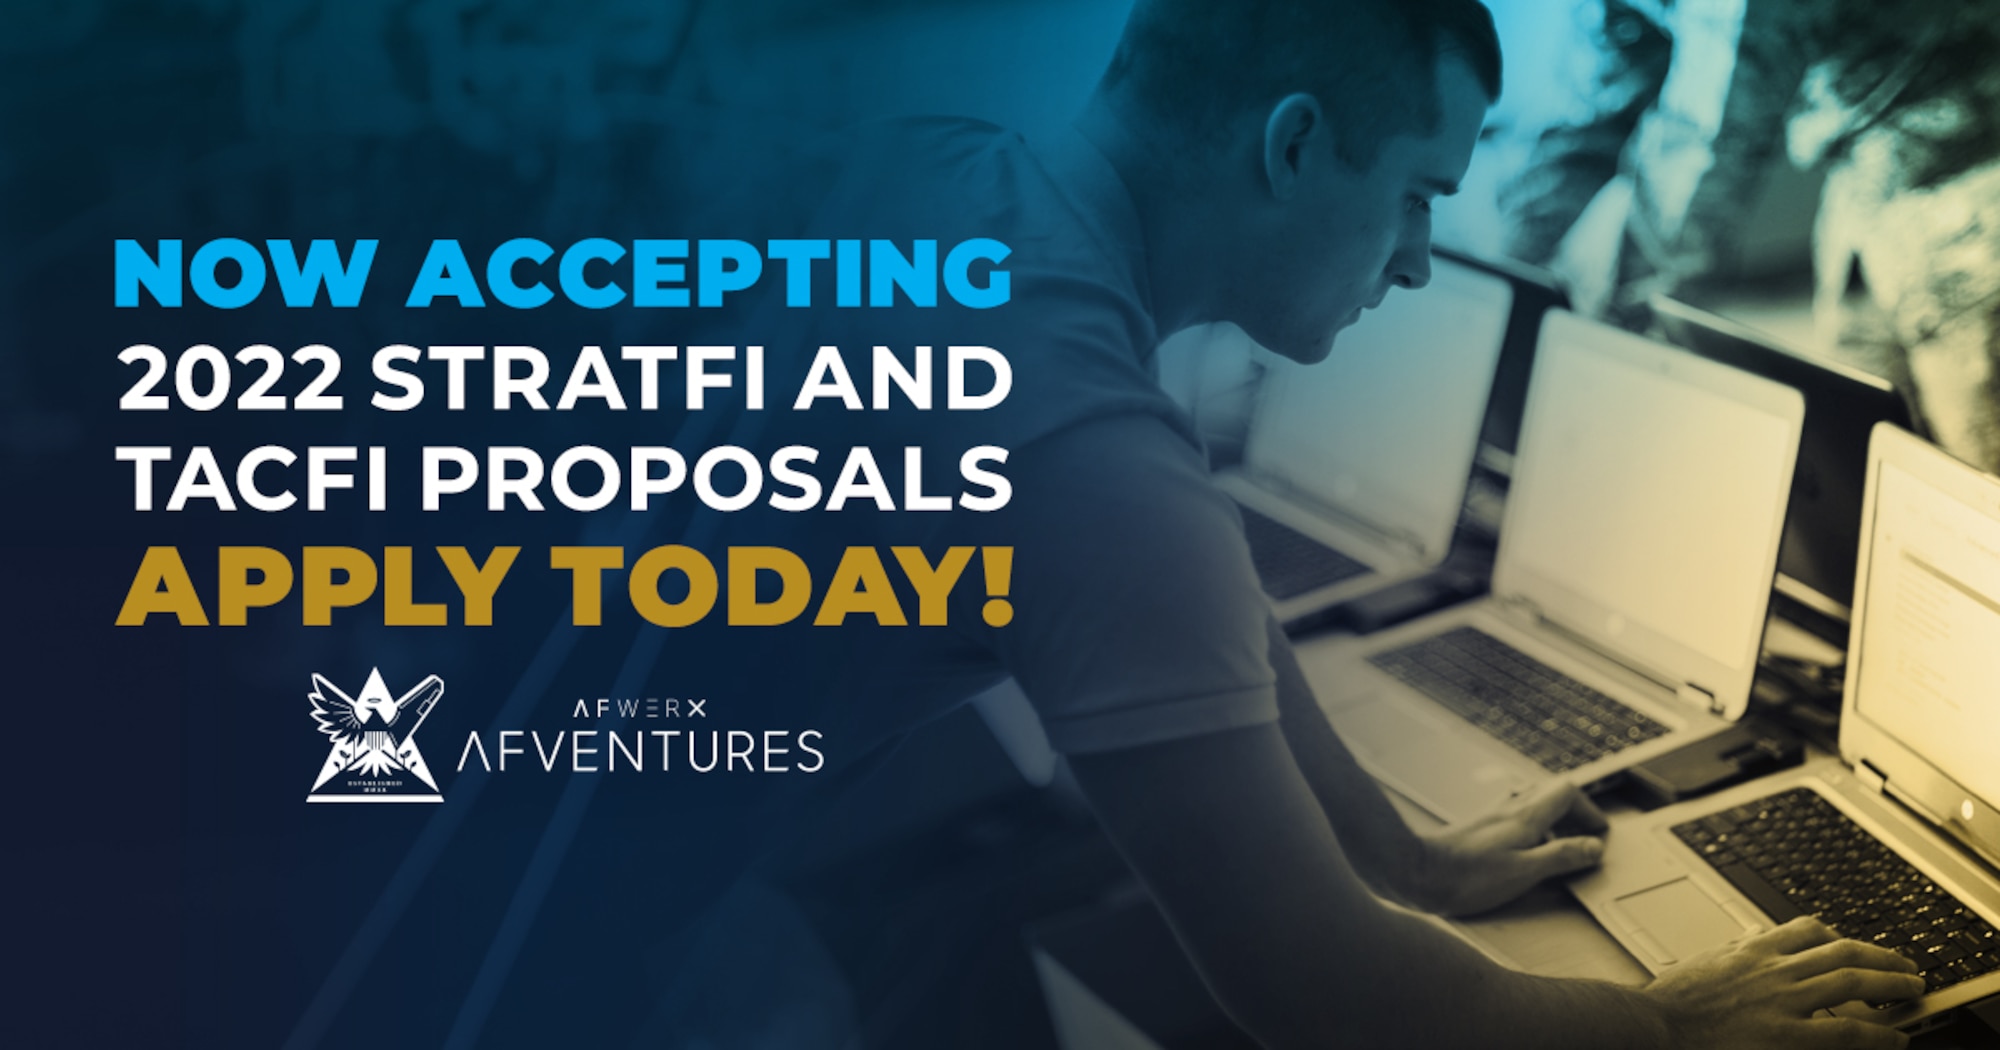 AFWERX AFVentures has issued a notice of opportunity for its Strategic Funding Increase (STRATFI) and Tactical Funding Increase (TACFI) programs. This opportunity, open until June 30, 2022, gives Department of the Air Force (DAF) SBIR/STTR companies with promising Phase II prototypes a chance to express firm interest in these co-funding programs, designed to accelerate the development of promising technology. It also allows DAF acquisition program leaders the opportunity to gather the information needed to target certain technologies for strategic investment by the government. (Courtesy graphic)